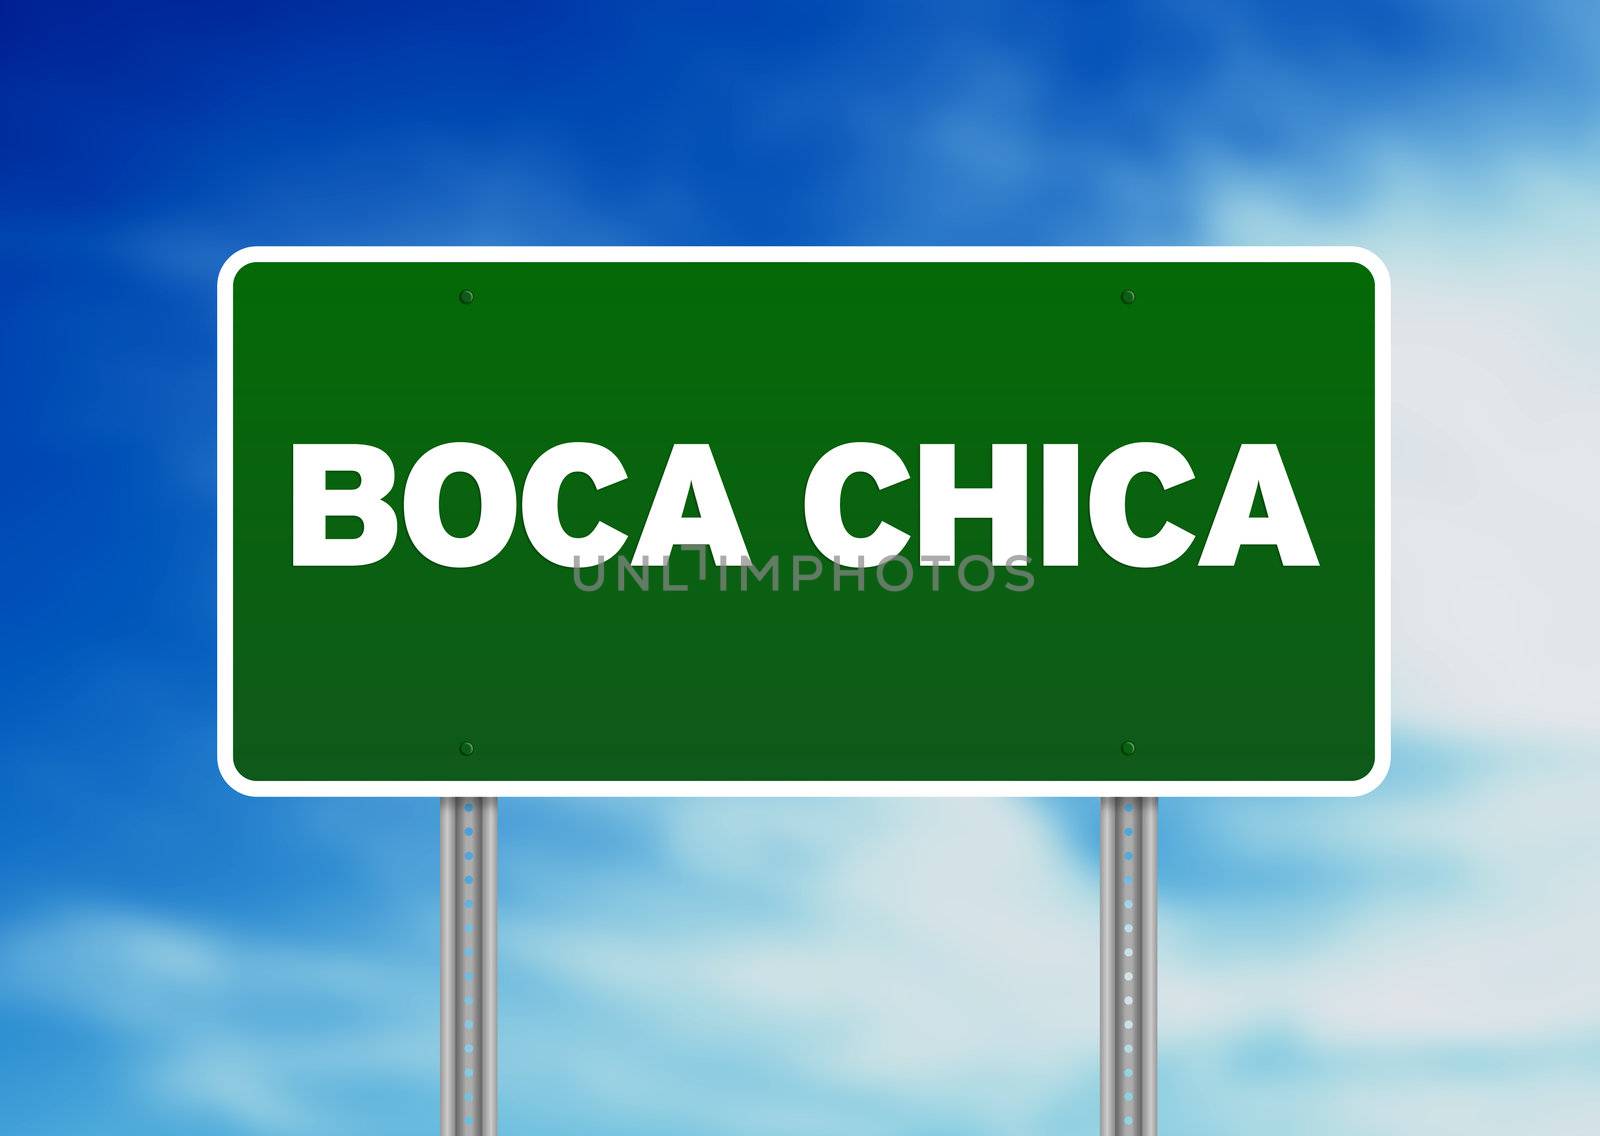 Green Boca Chica, Dominican Republic highway sign on Cloud Background.